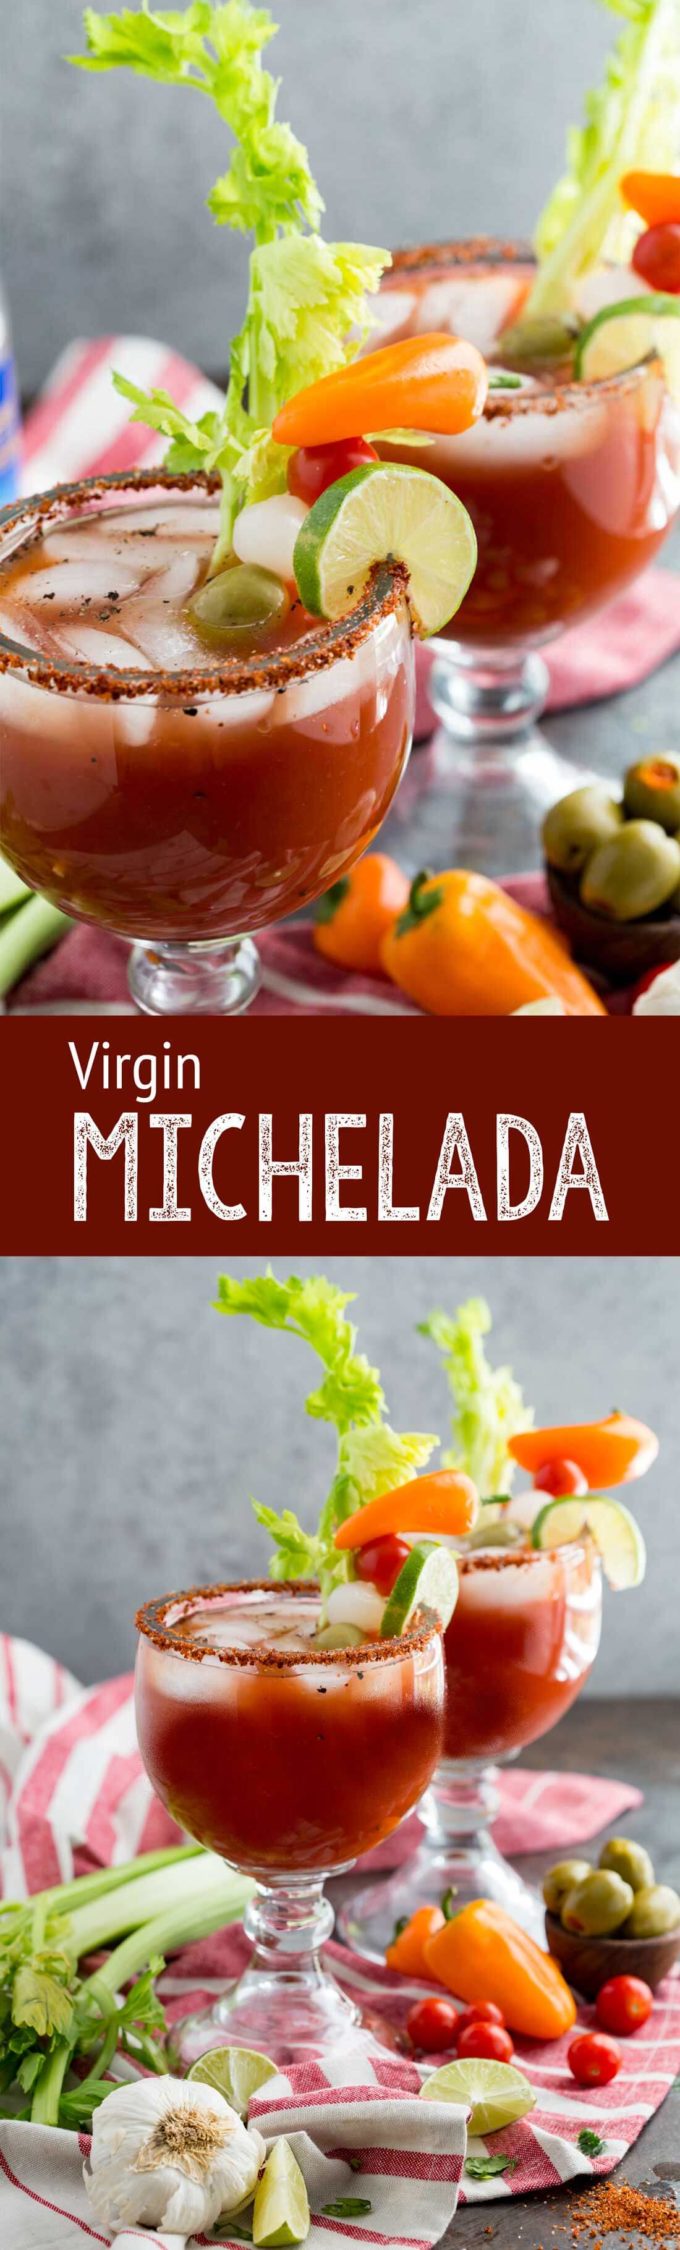 Michelada Ingredients: Or, not so bloody mary. This is a spicy tomato based mocktail with bold flavors, and a fun kick perfect for eating alfresco with friends! 